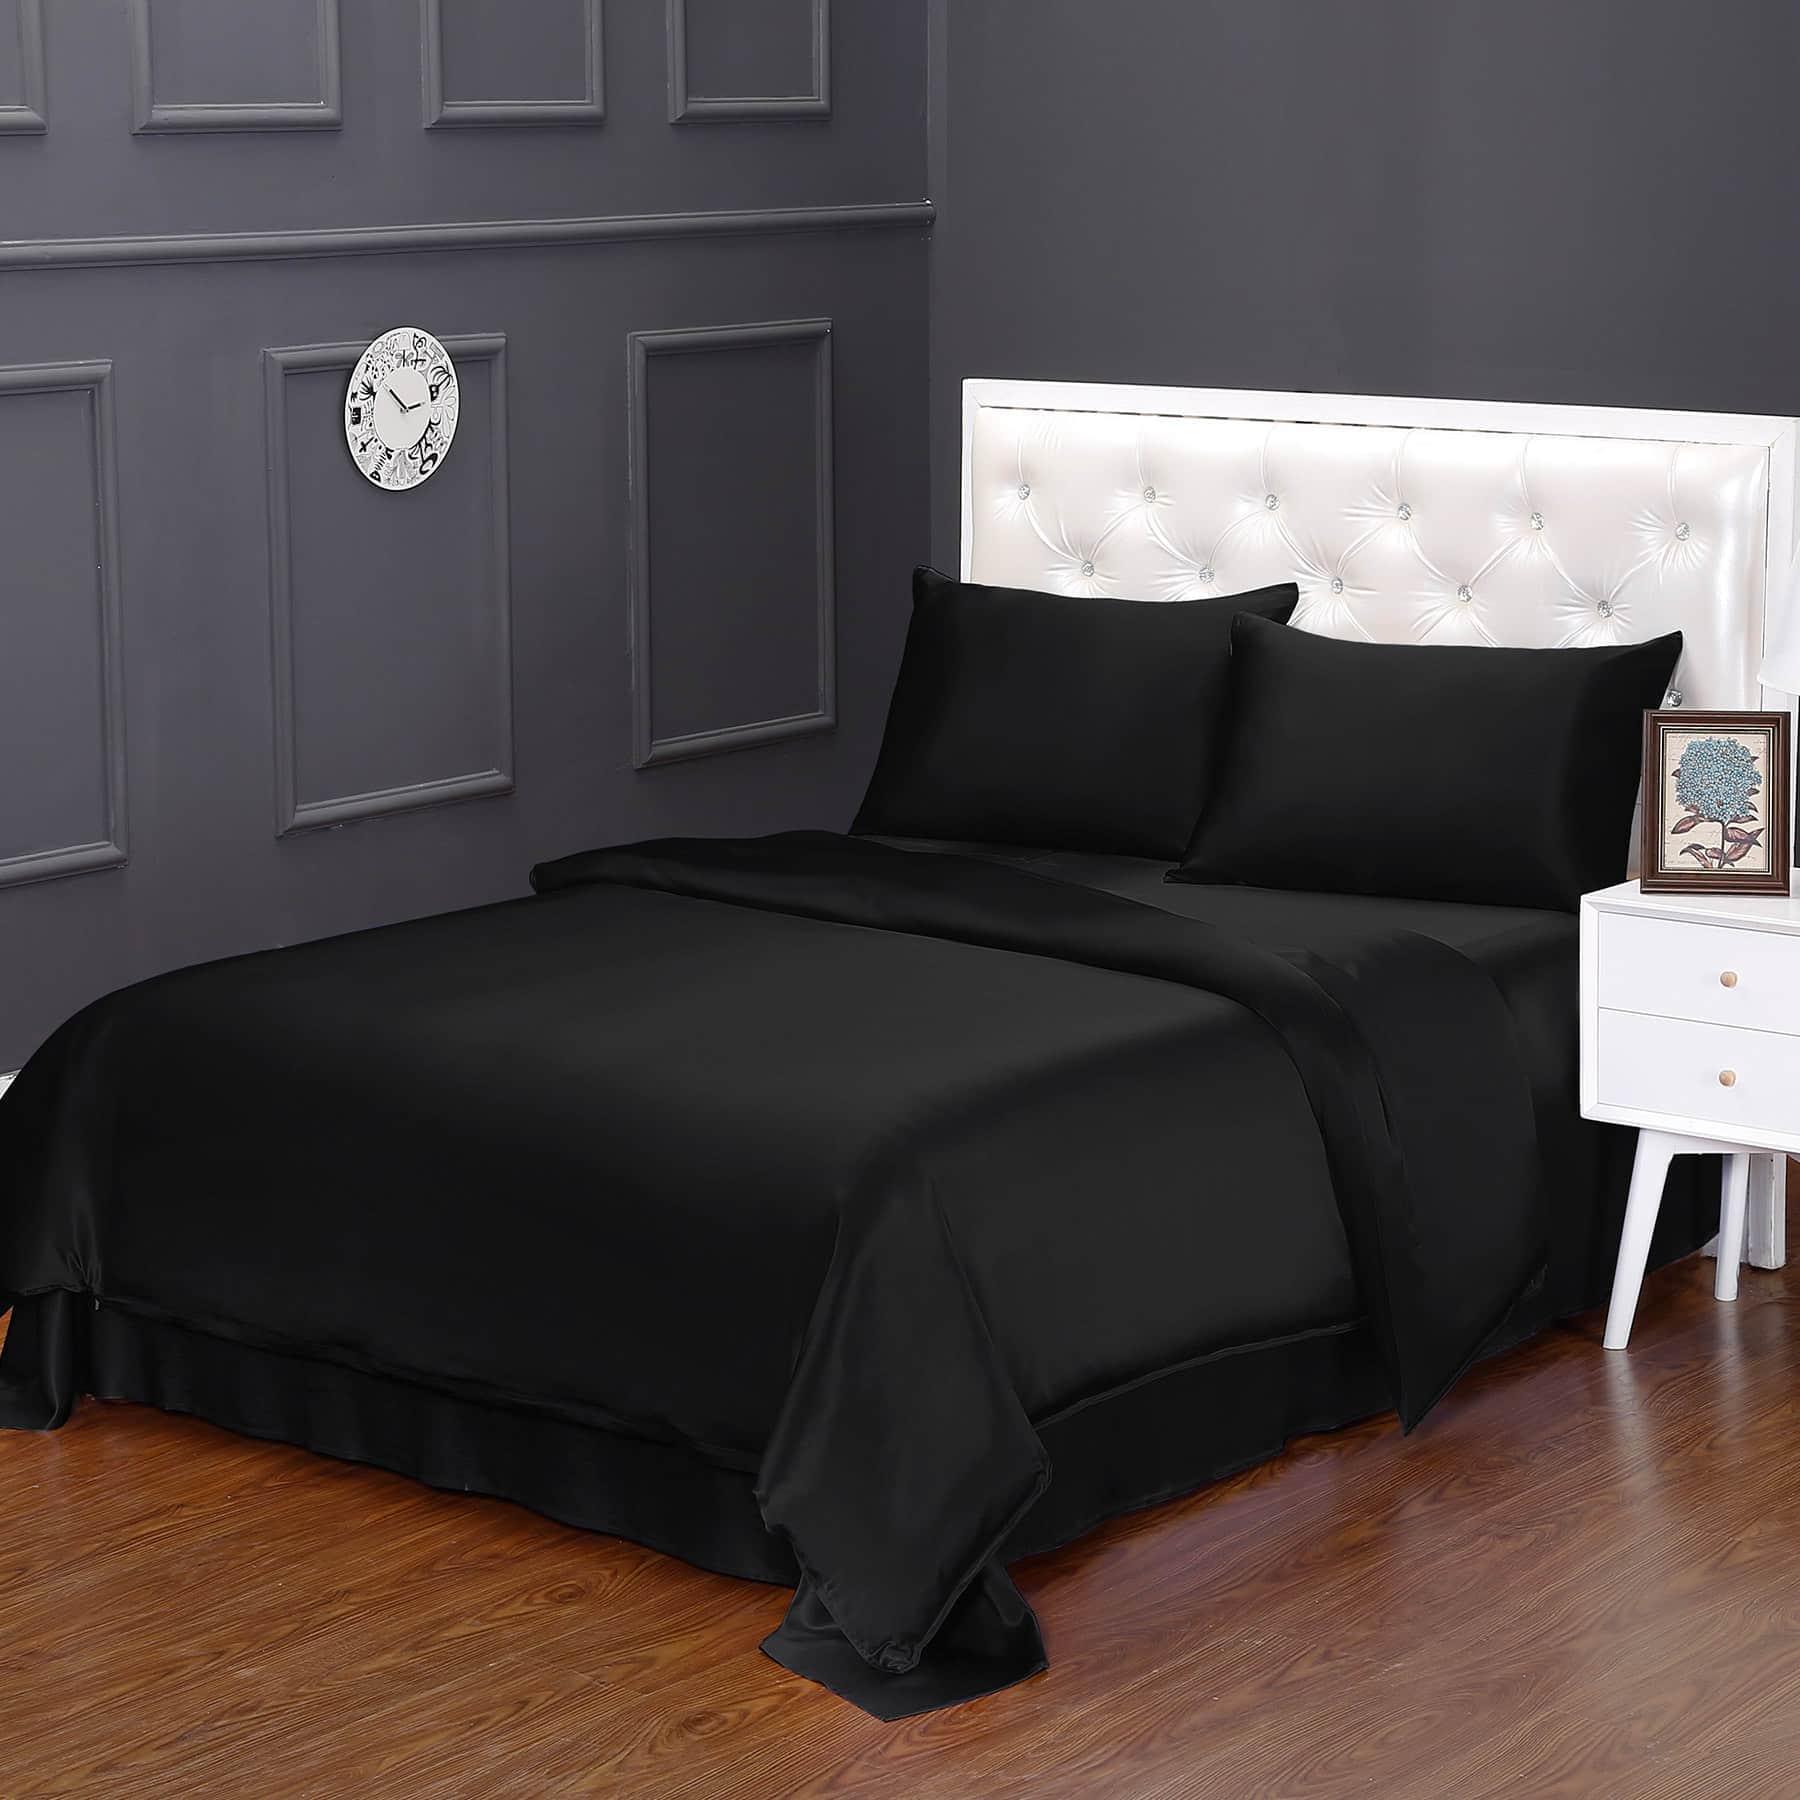 Shop 0 Black / China / Full LILYSILK Bedding Set 4pcs Silk 100 Mulberry Luxury Queen King Seamless Duvet Cover Fitted Sheet Oxford Pillowcases 19 Momme Mademoiselle Home Decor